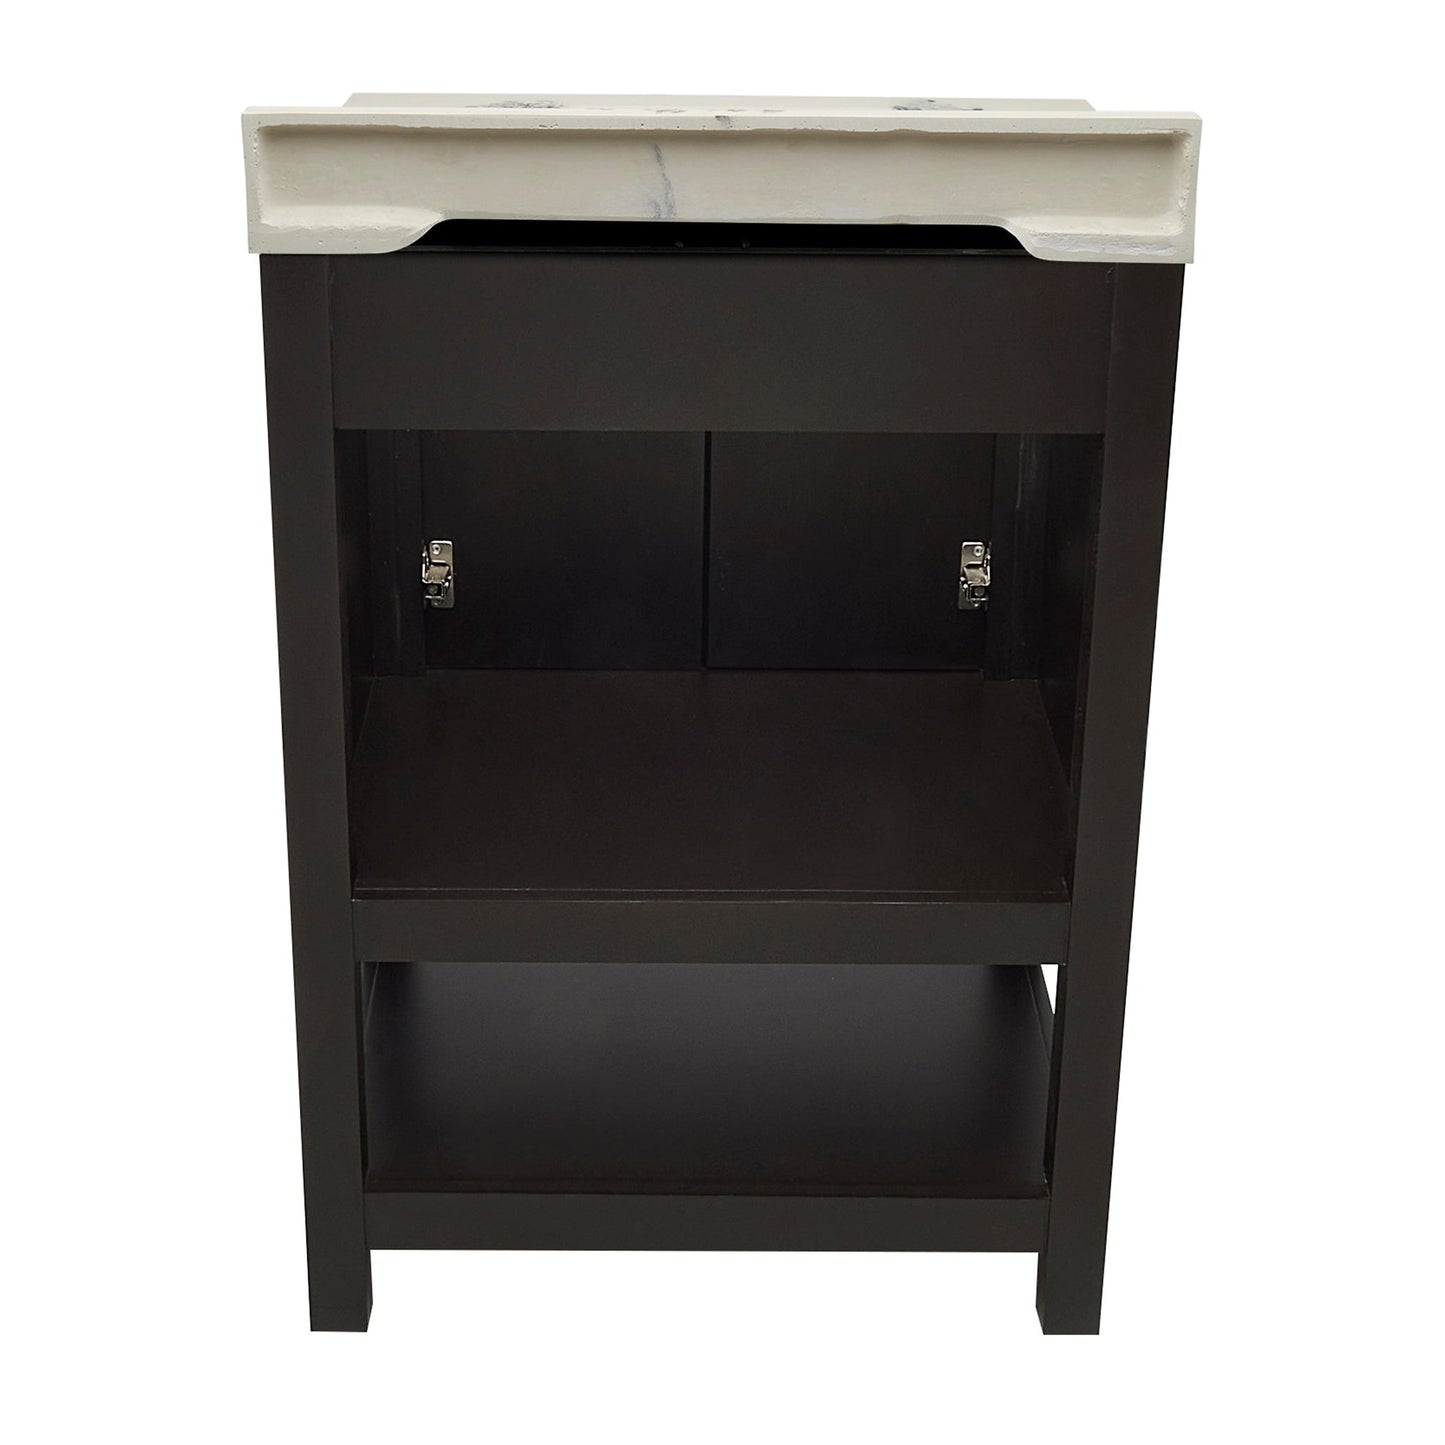 Ella's Bubbles Taos 25" Espresso Bathroom Vanity With Carrara White Cultured Marble Top With Backsplash and Sink